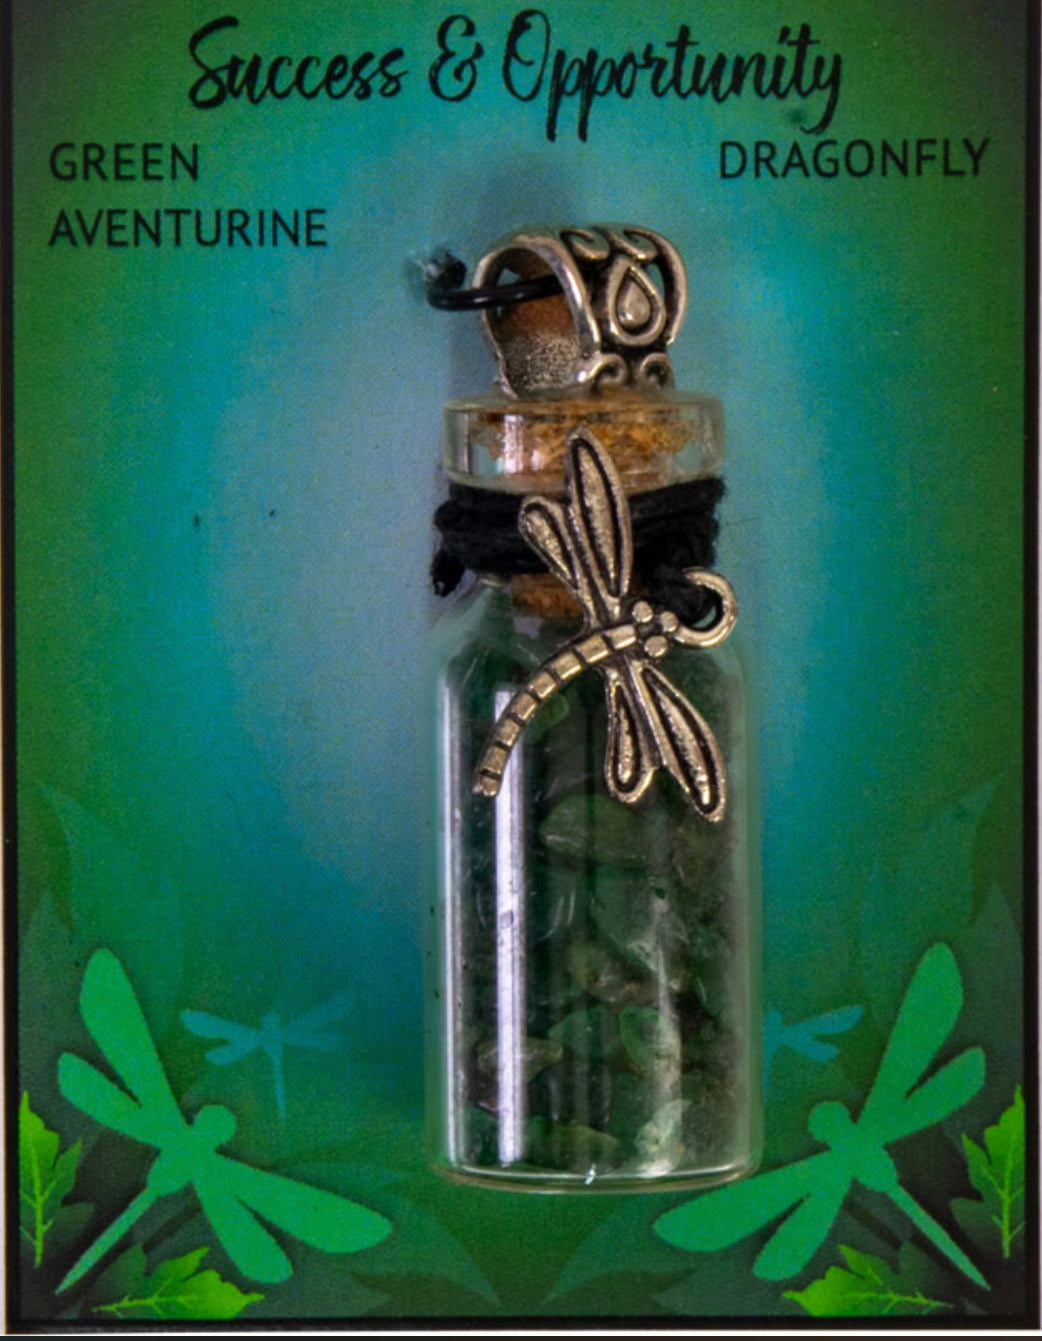 Small bottle with Green Aventurine chips and Dragonfly - black cord necklace - Good Luck - Money